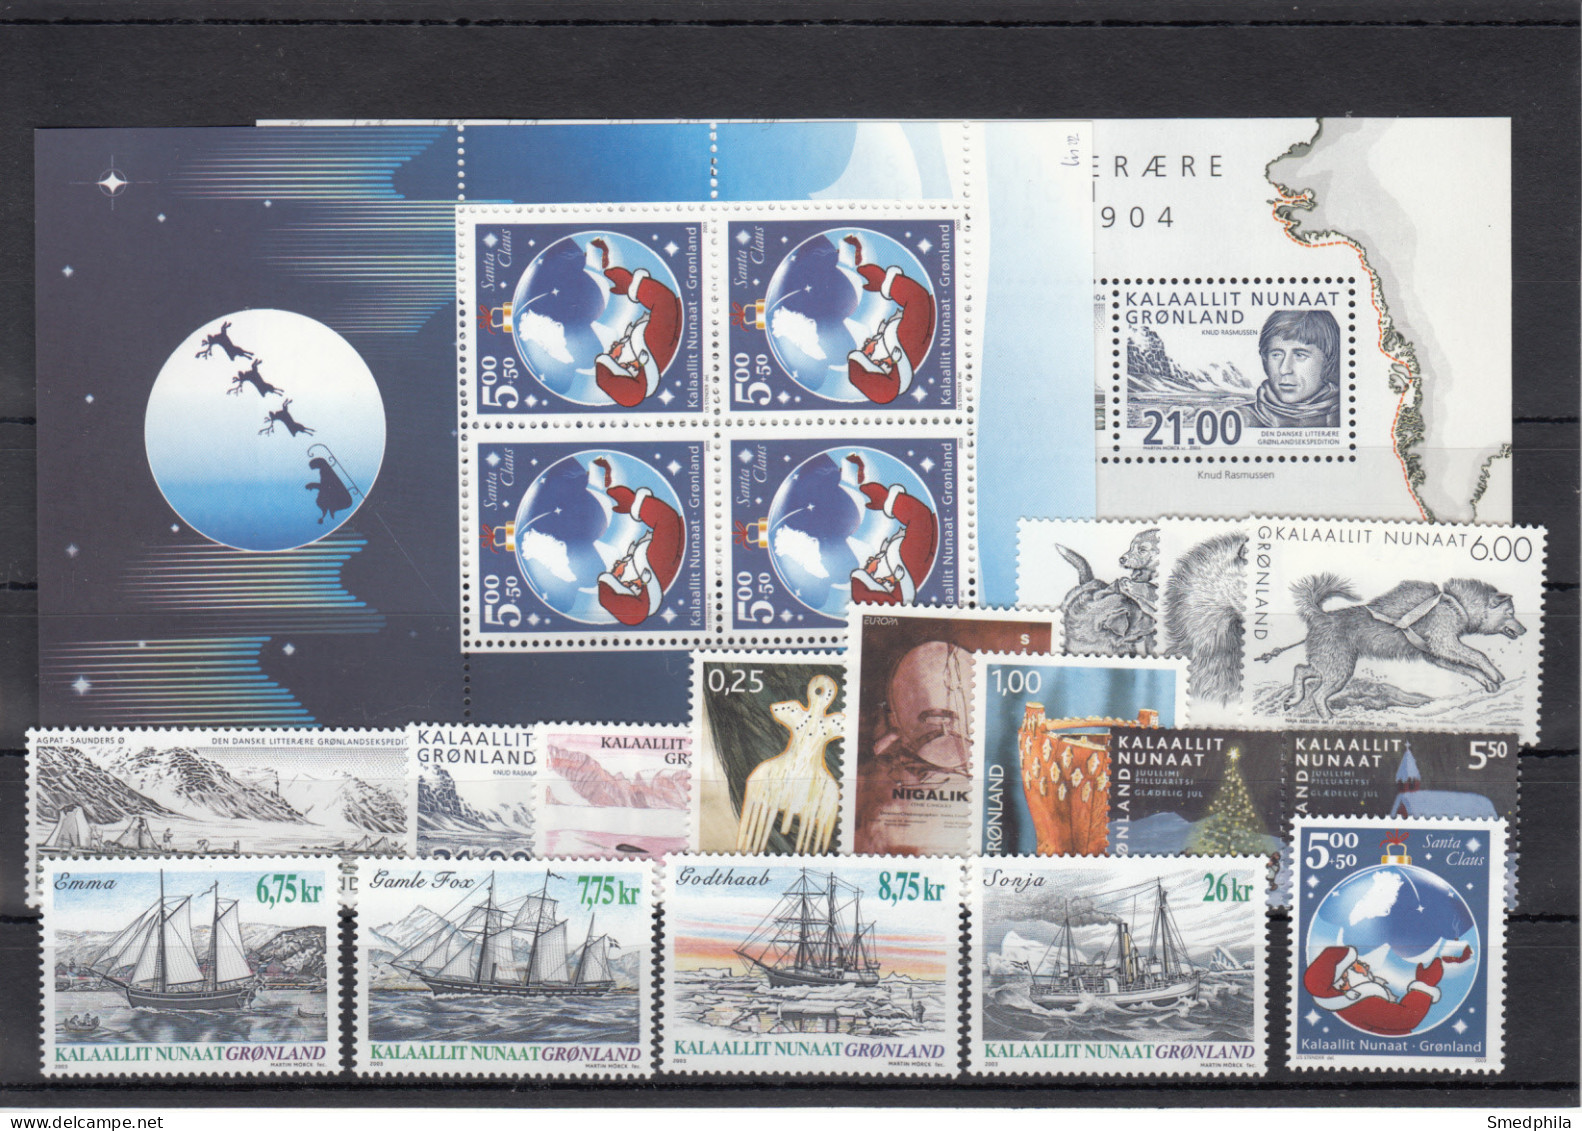 Greenland 2003 - Full Year MNH ** Excluding Self-Adhesive Stamps - Années Complètes